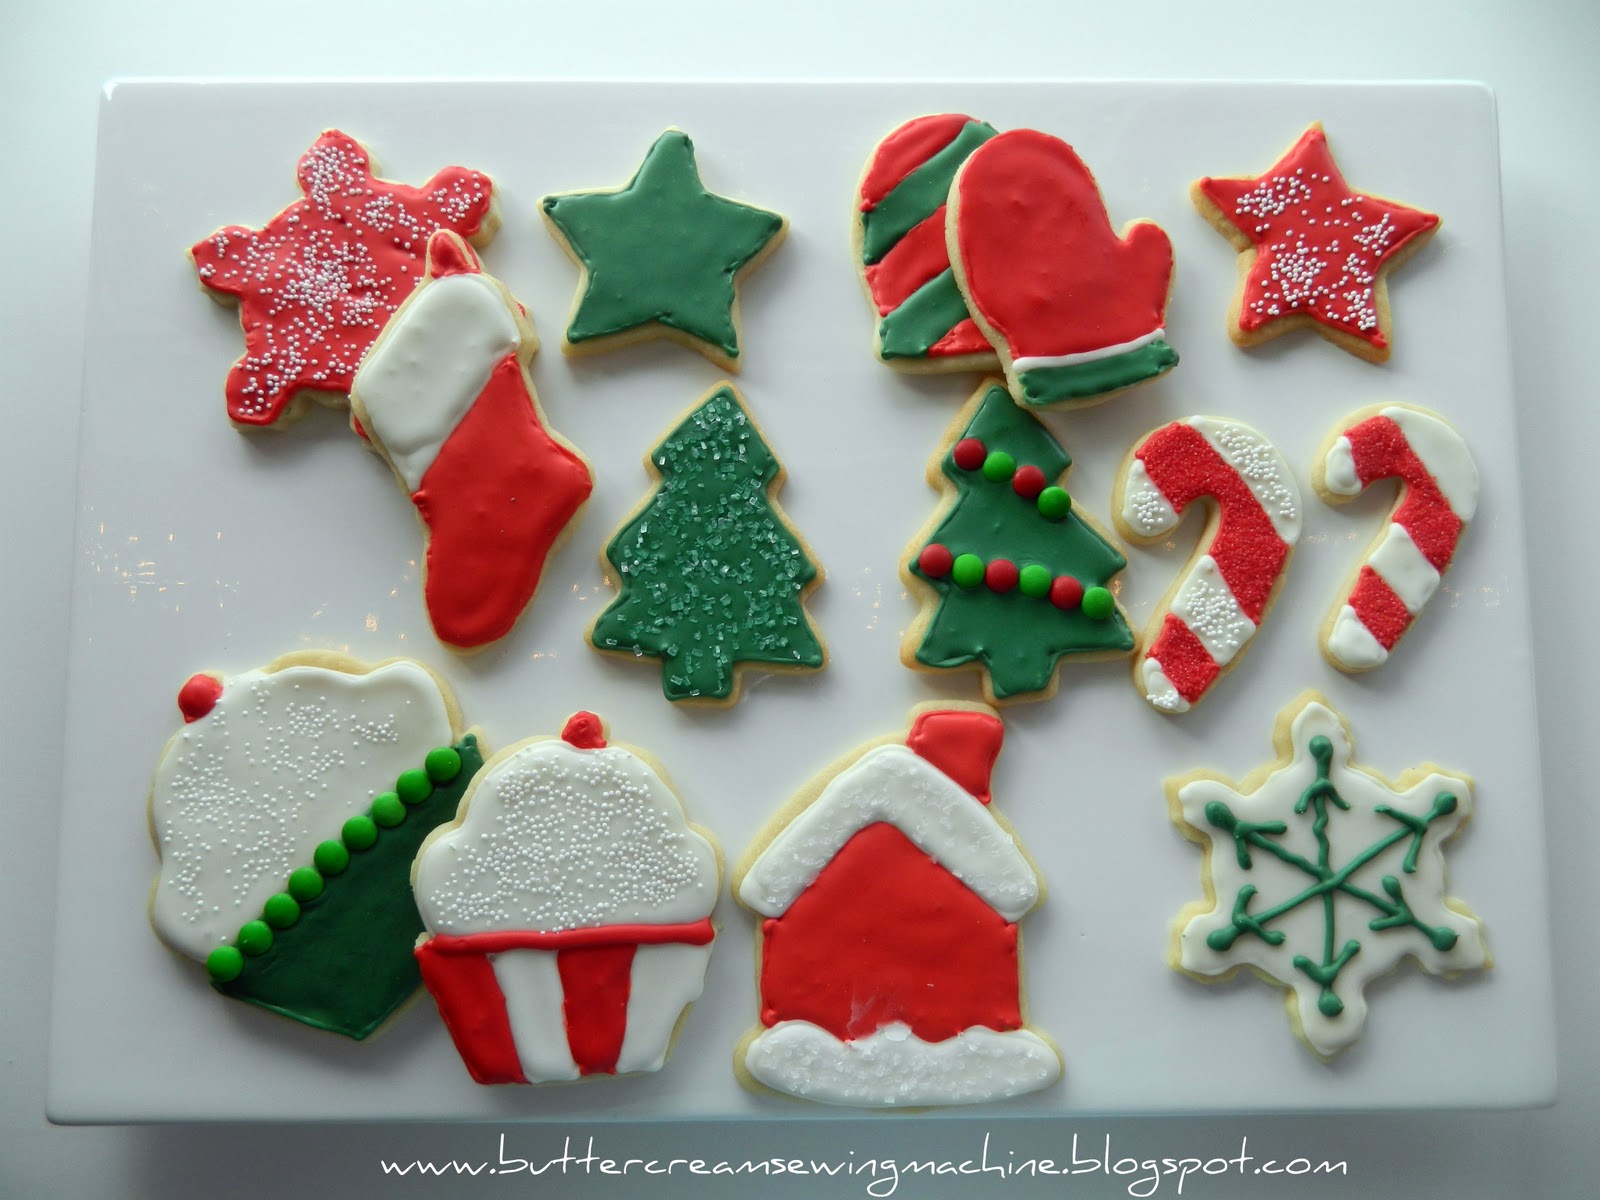 Buttercream and a Sewing Machine: Decorating Christmas Cookies